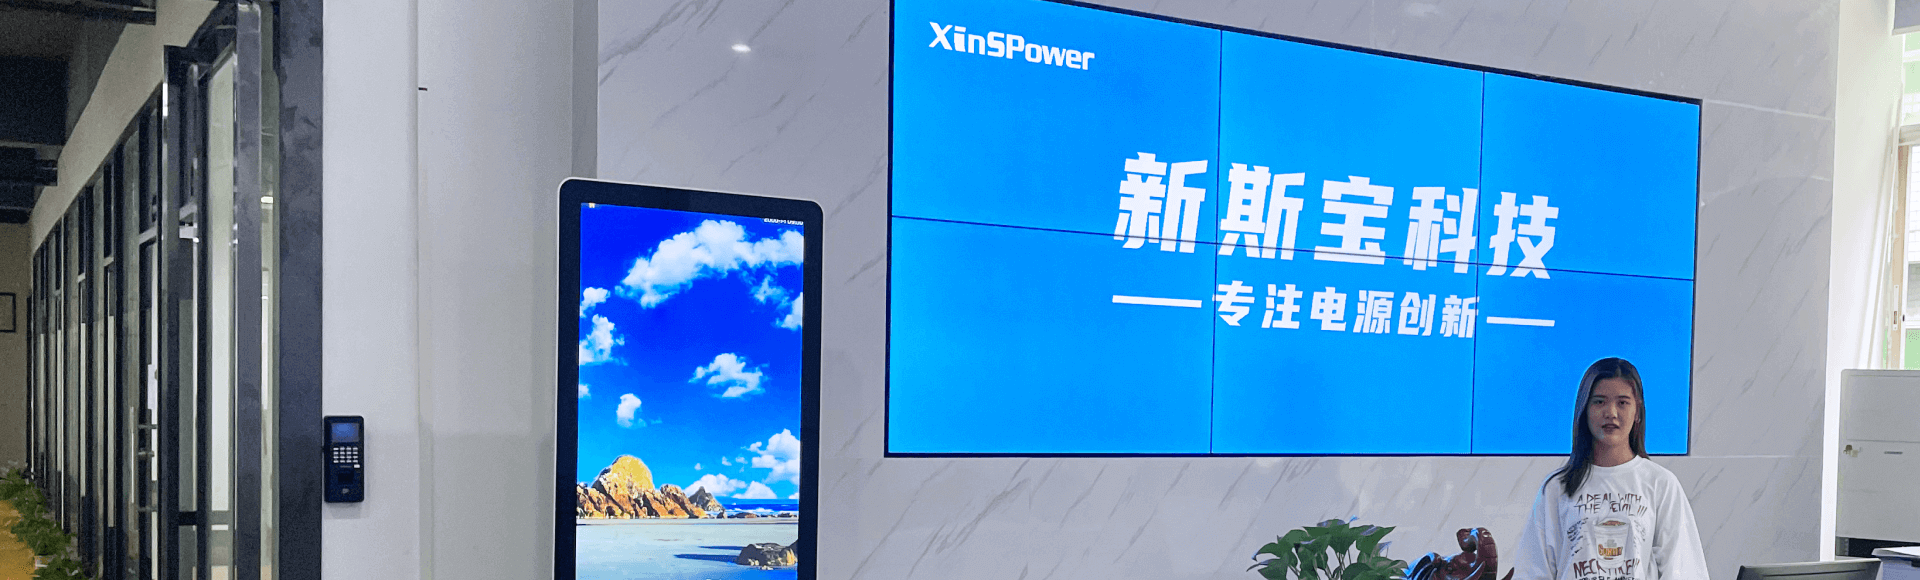 About XinSpower